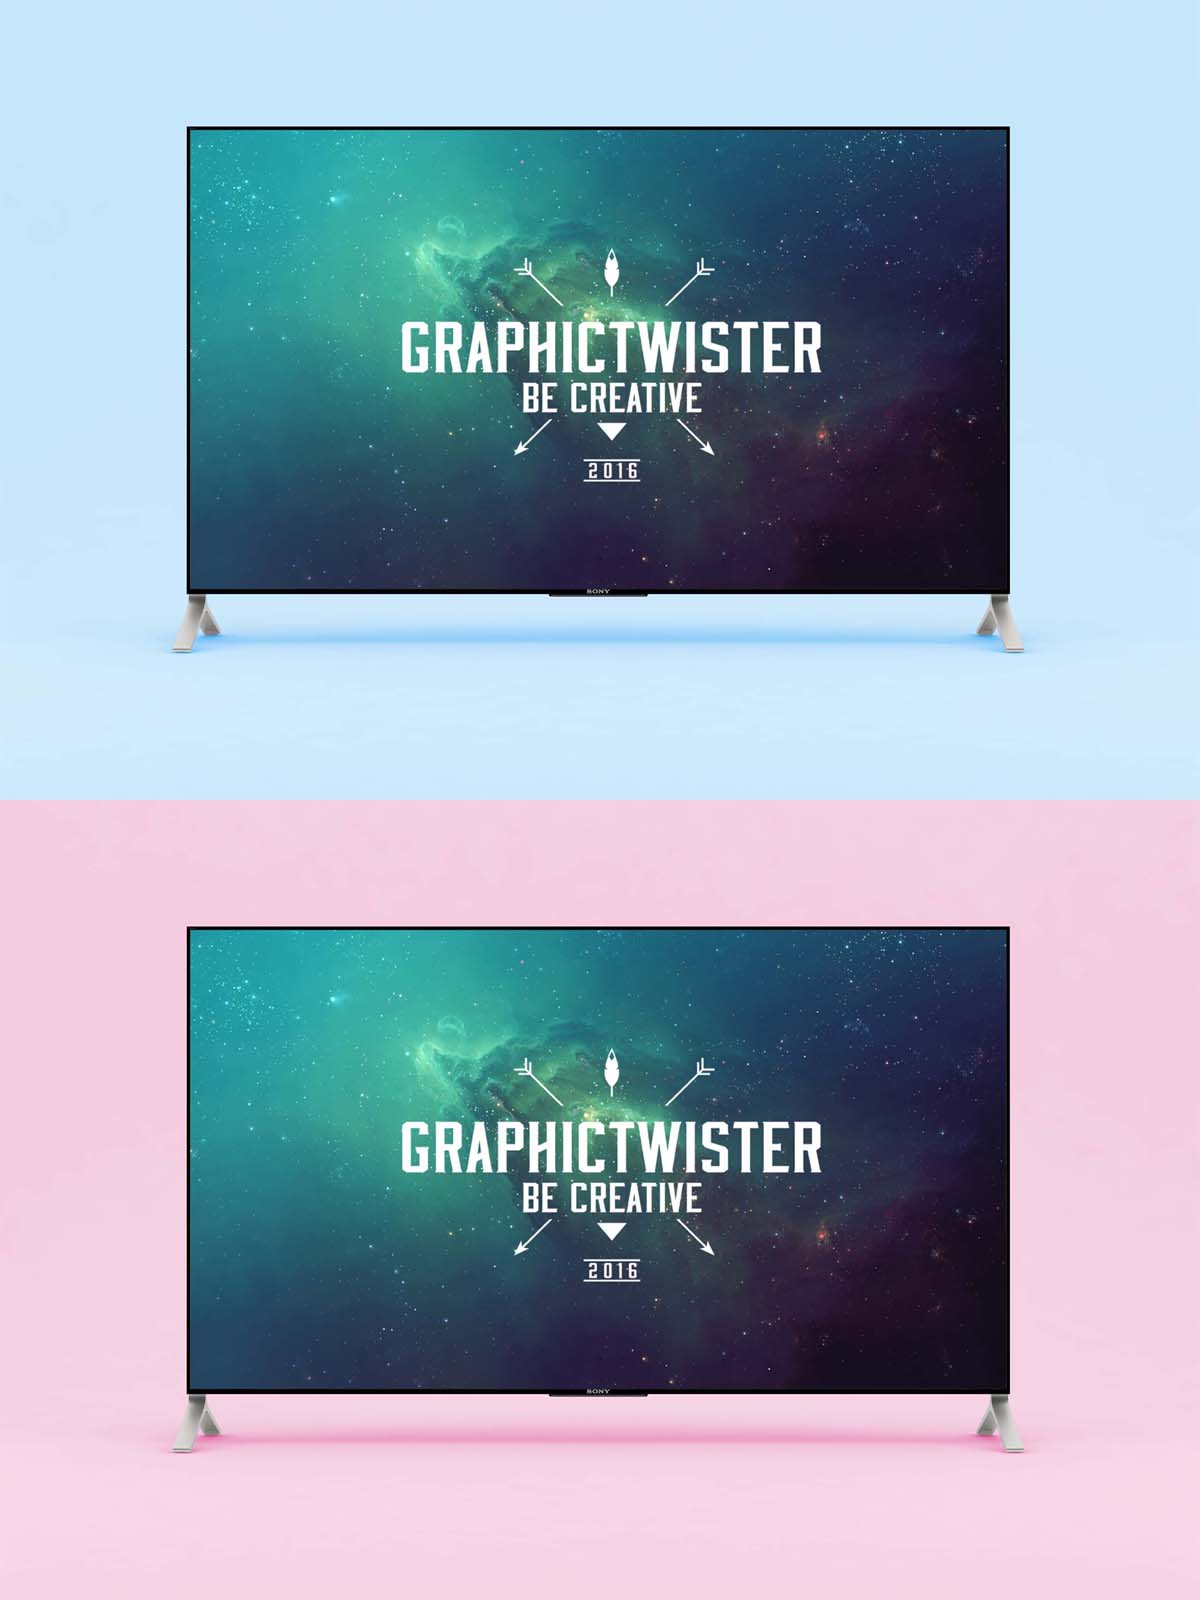 Download Free Smart TV 4K Mockup (PSD) - Find the Perfect Creative ...